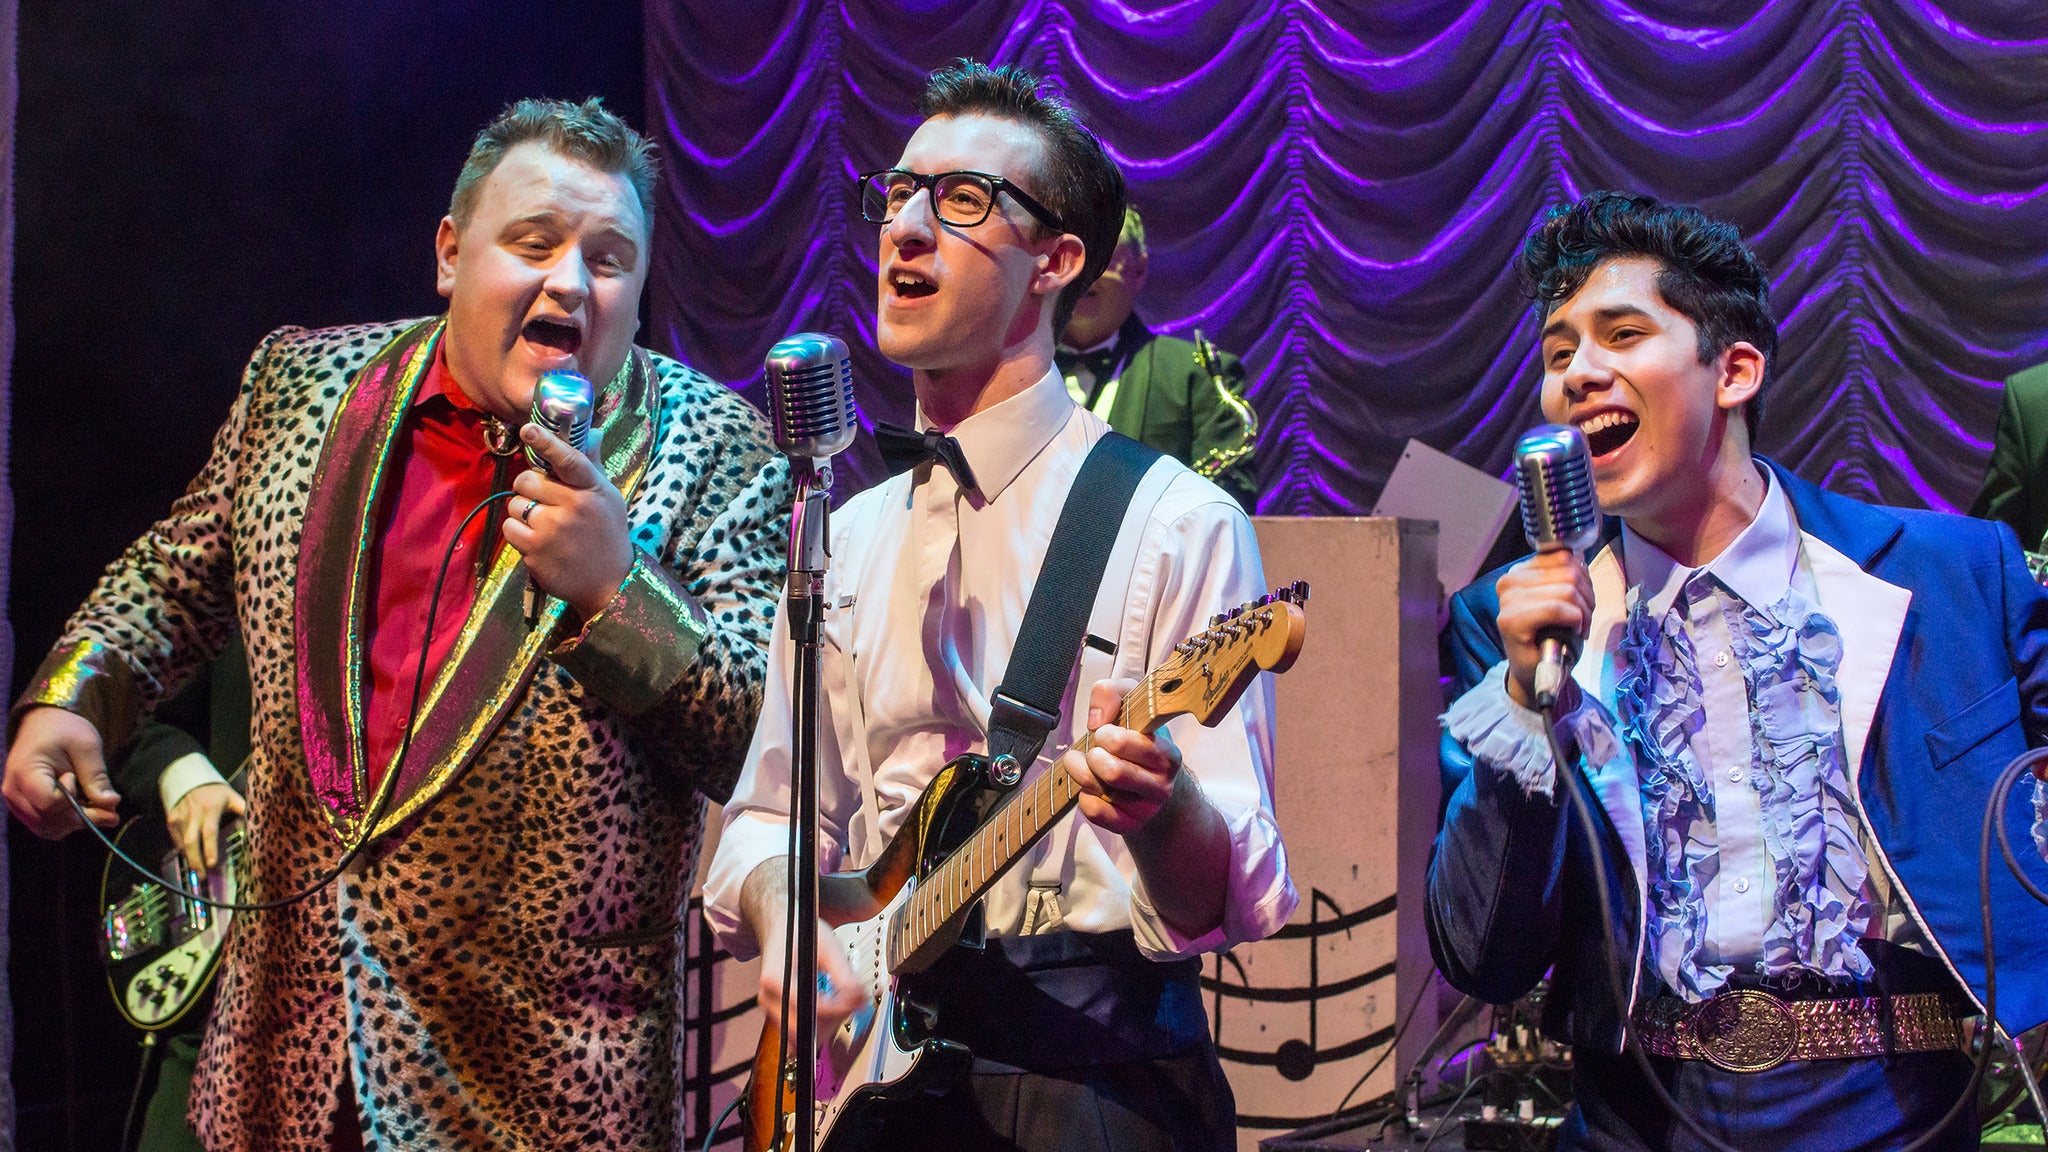 buddy holly story tour dates